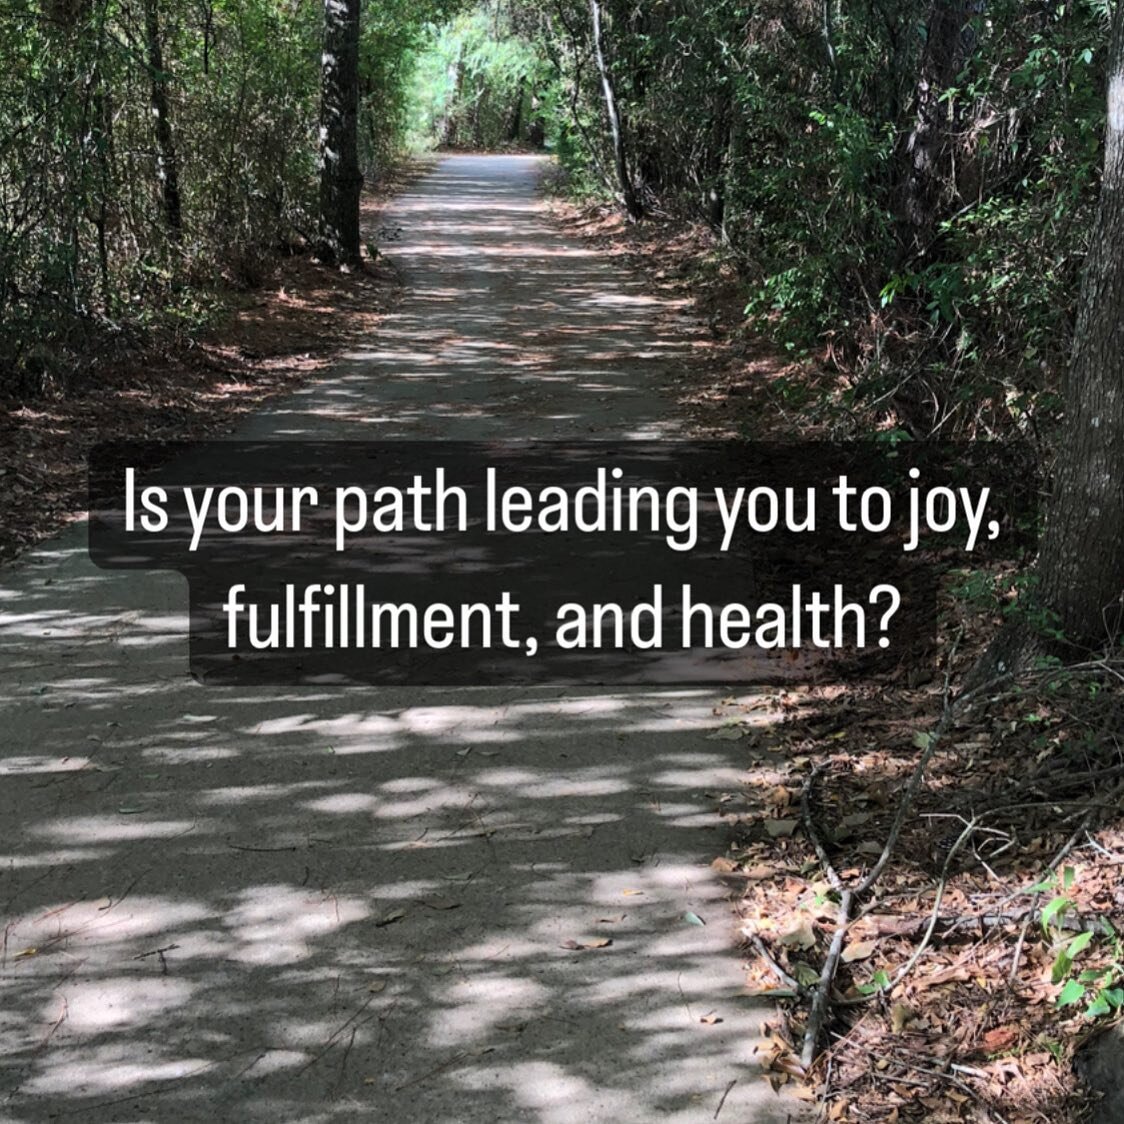 Where is your path taking you?

Yesterday Harper and I talked to you about self-care routines. 

She said she eats her oranges for vitamin C and to not get mucus (from a cold).

I mentioned I&rsquo;ve been going for morning walks.

What we didn&rsquo